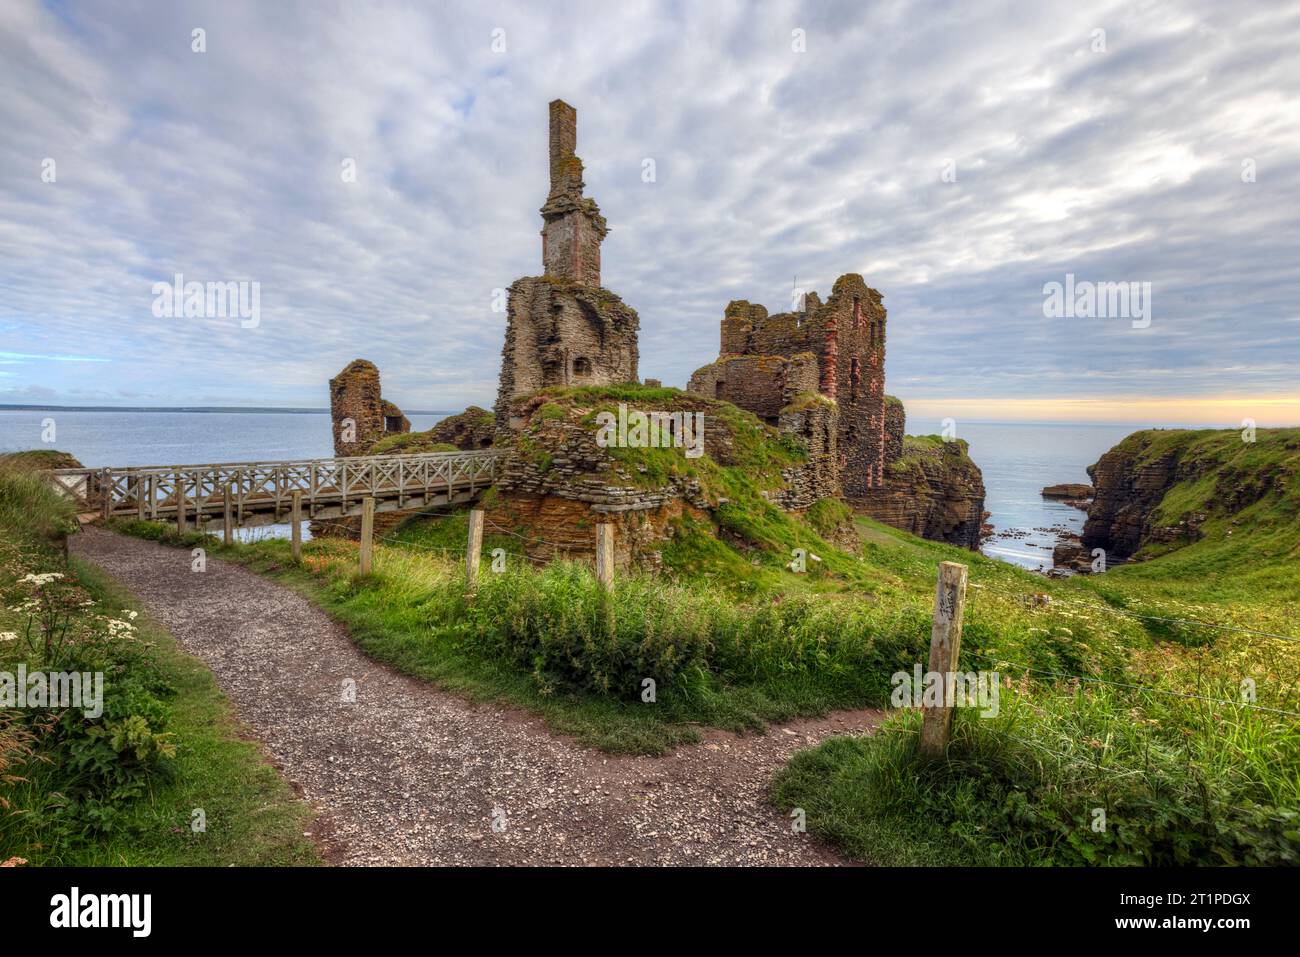 Castle Sinclair Girnigoe is a ruined castle located on a clifftop overlooking the town of Wick in Caithness, Scotland. Stock Photo